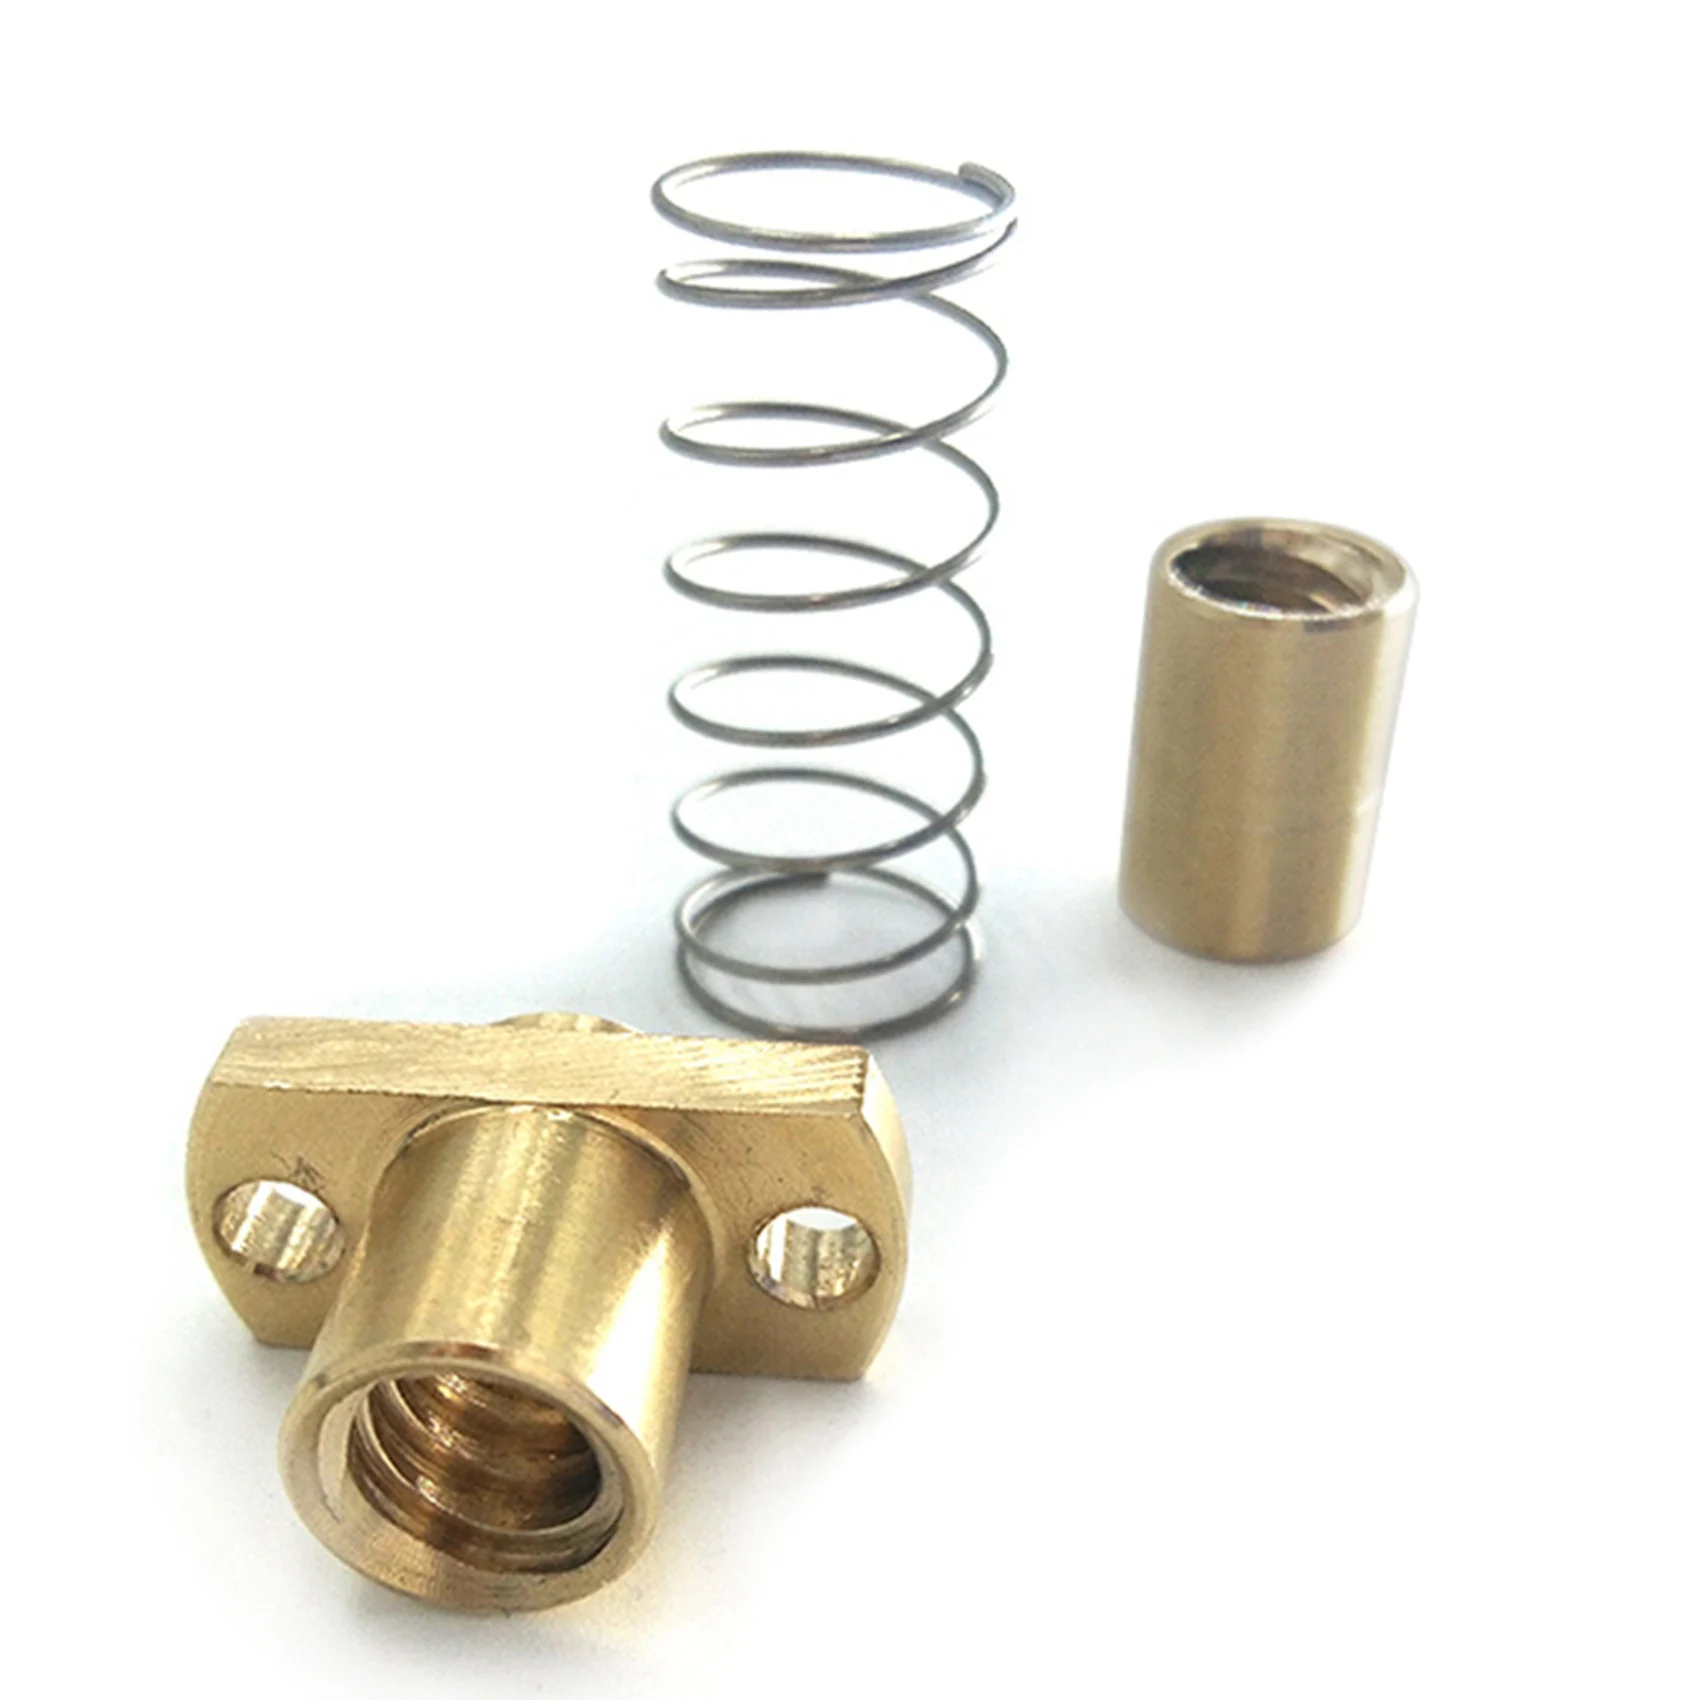 

CNC 3018 Exclusive 3D Printer Parts T8 Anti-Backlash Spring Nut to Eliminate Space Nut 10 mm